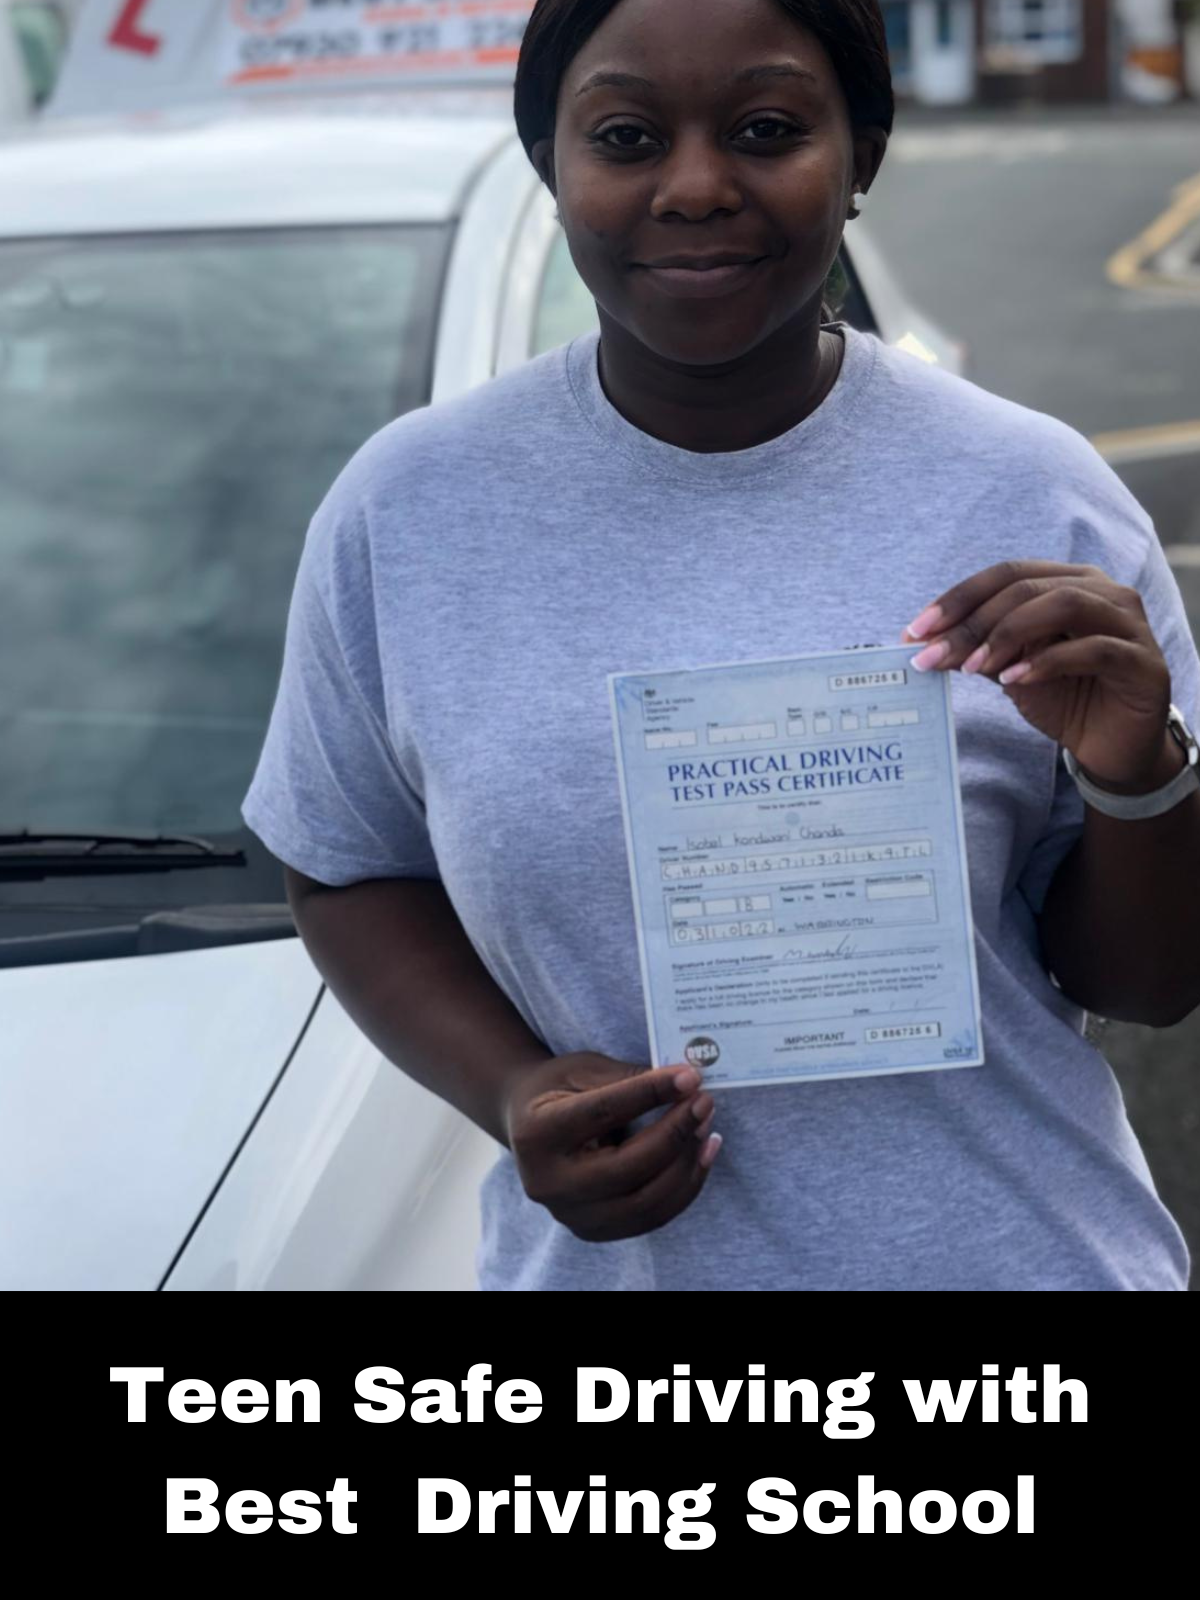 Teen Safe Driving with Best Driving School